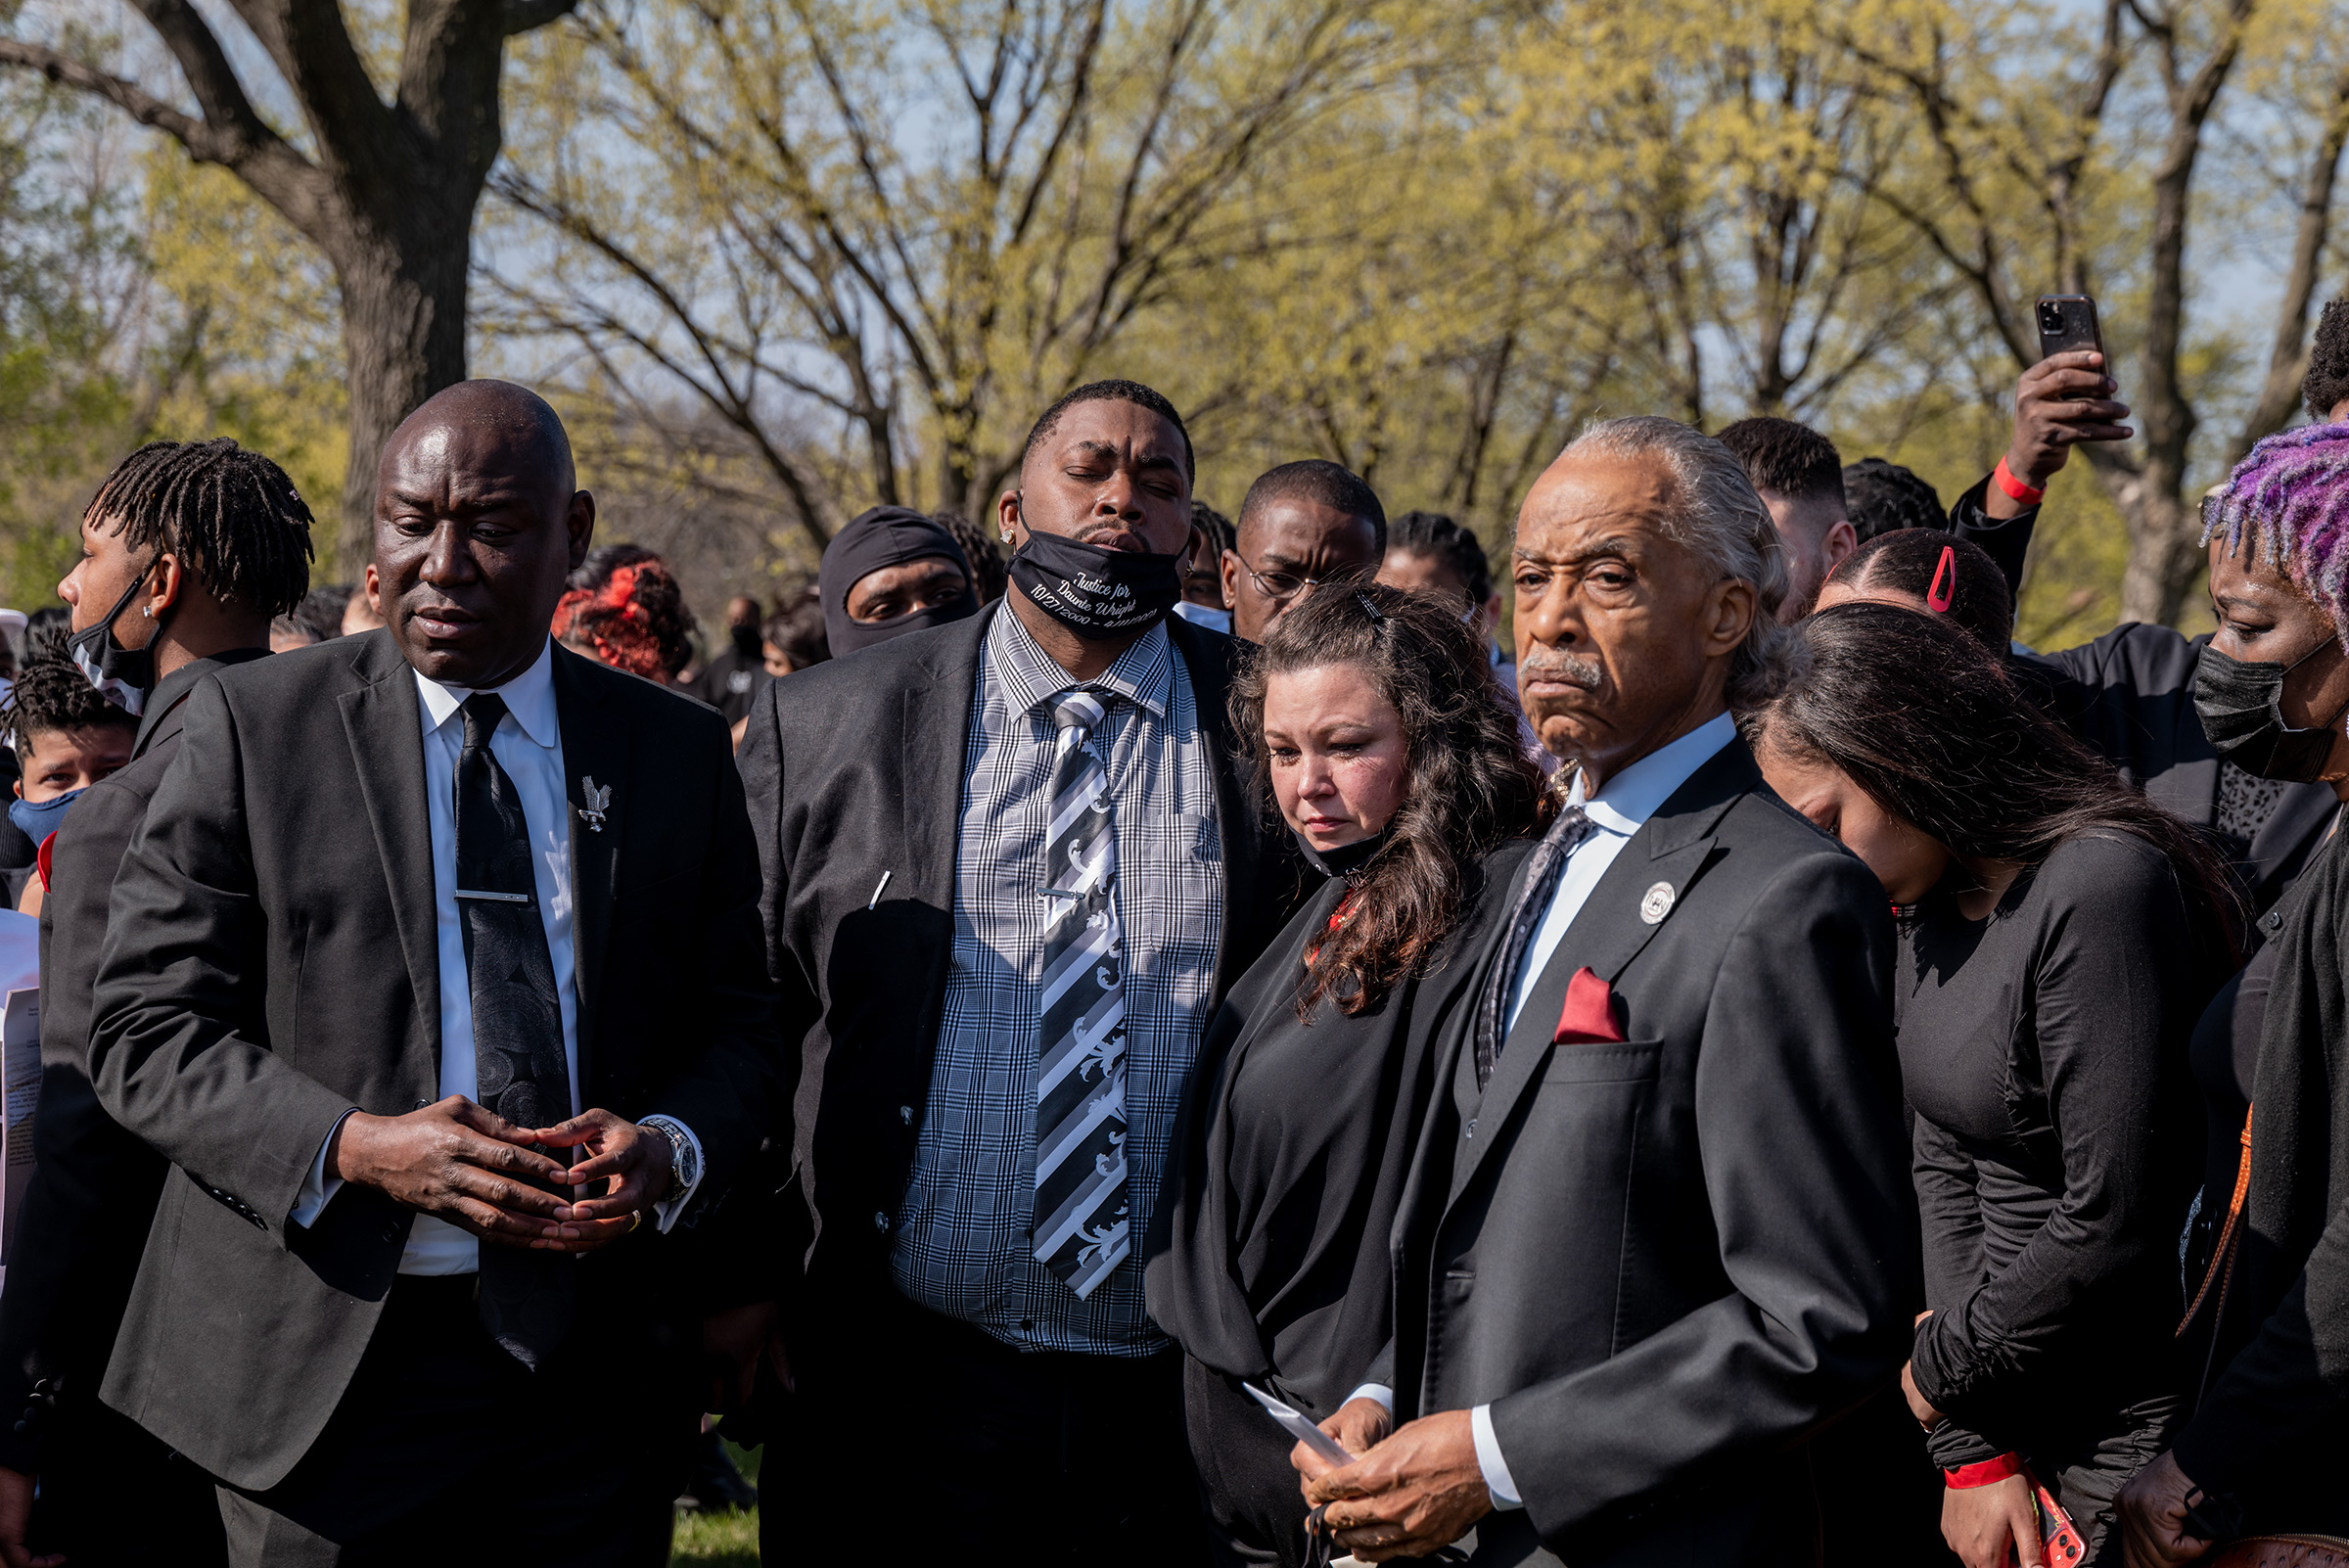 Aubrey and Katie Wright, the parents of Daunte Wright, stand with Crump (far left) and Sharpton (far right), at Lakewood Cemetery after their son's funeral in Minneapolis on April 22. (Ruddy Roye for TIME)